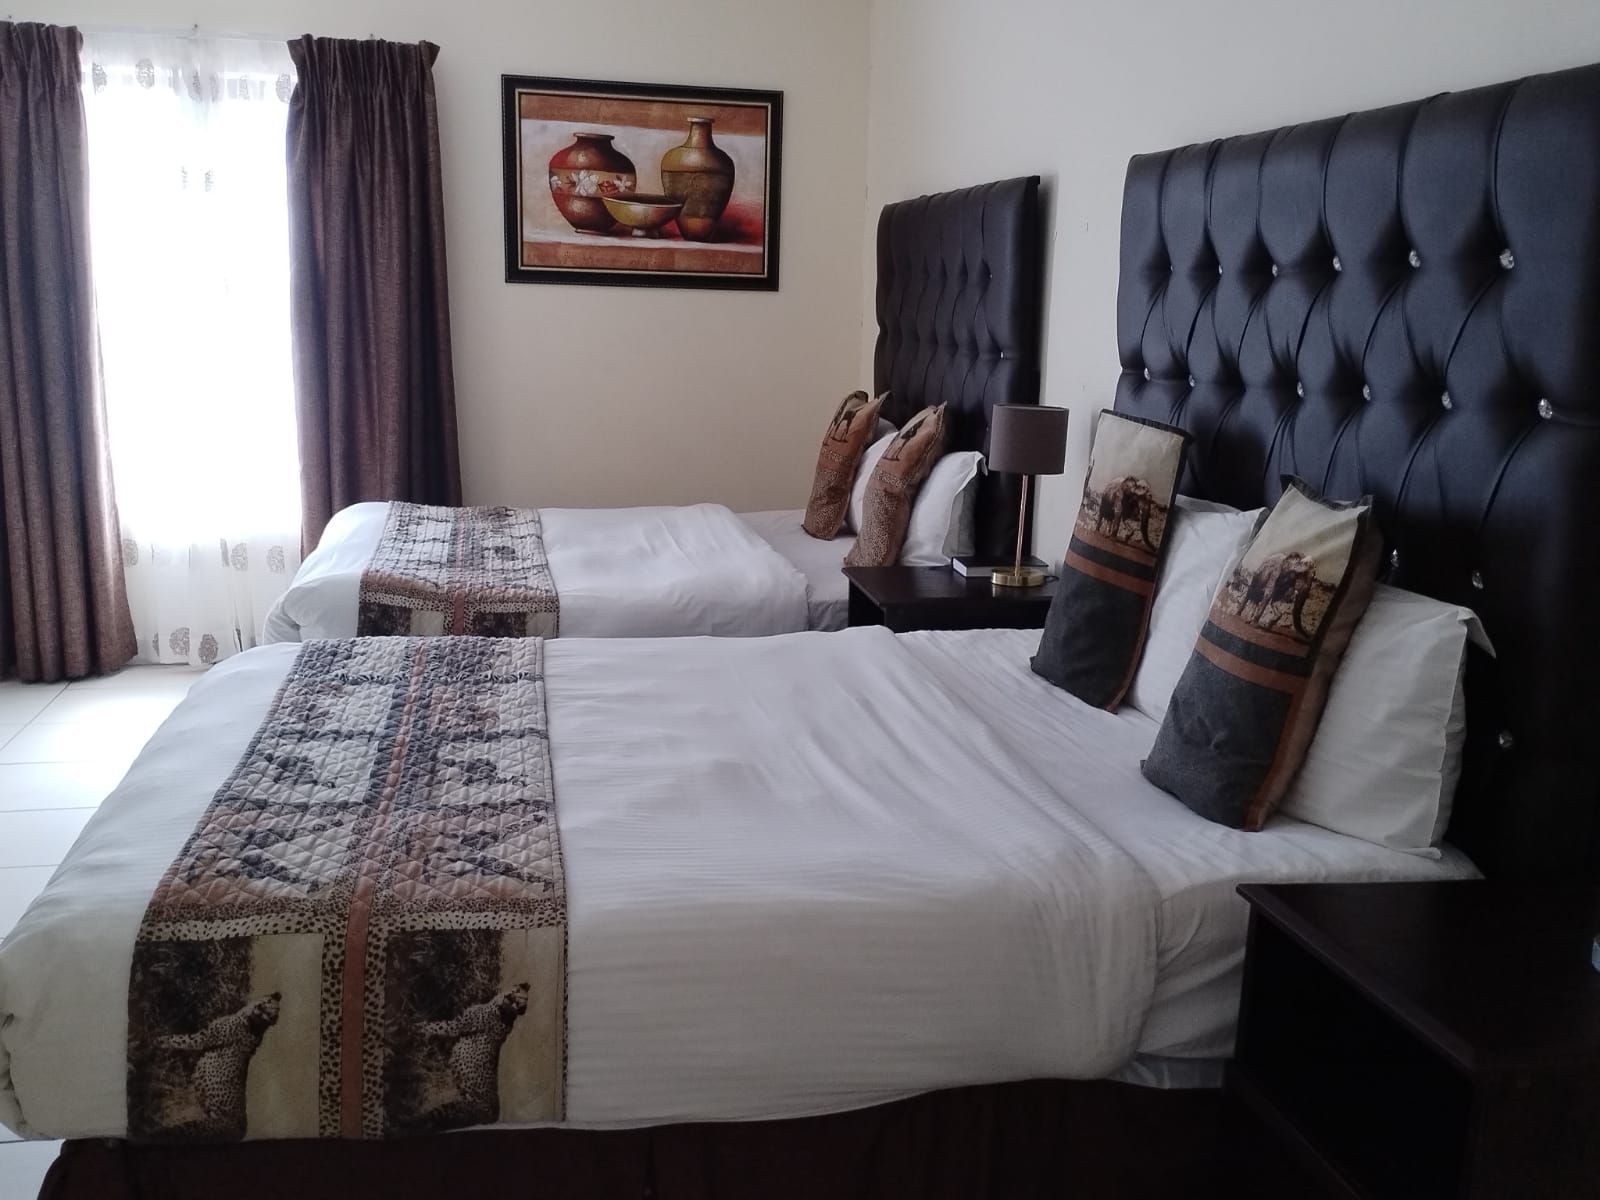 Ecotel Southgate Inn Meredale Johannesburg Gauteng South Africa Unsaturated, Bedroom